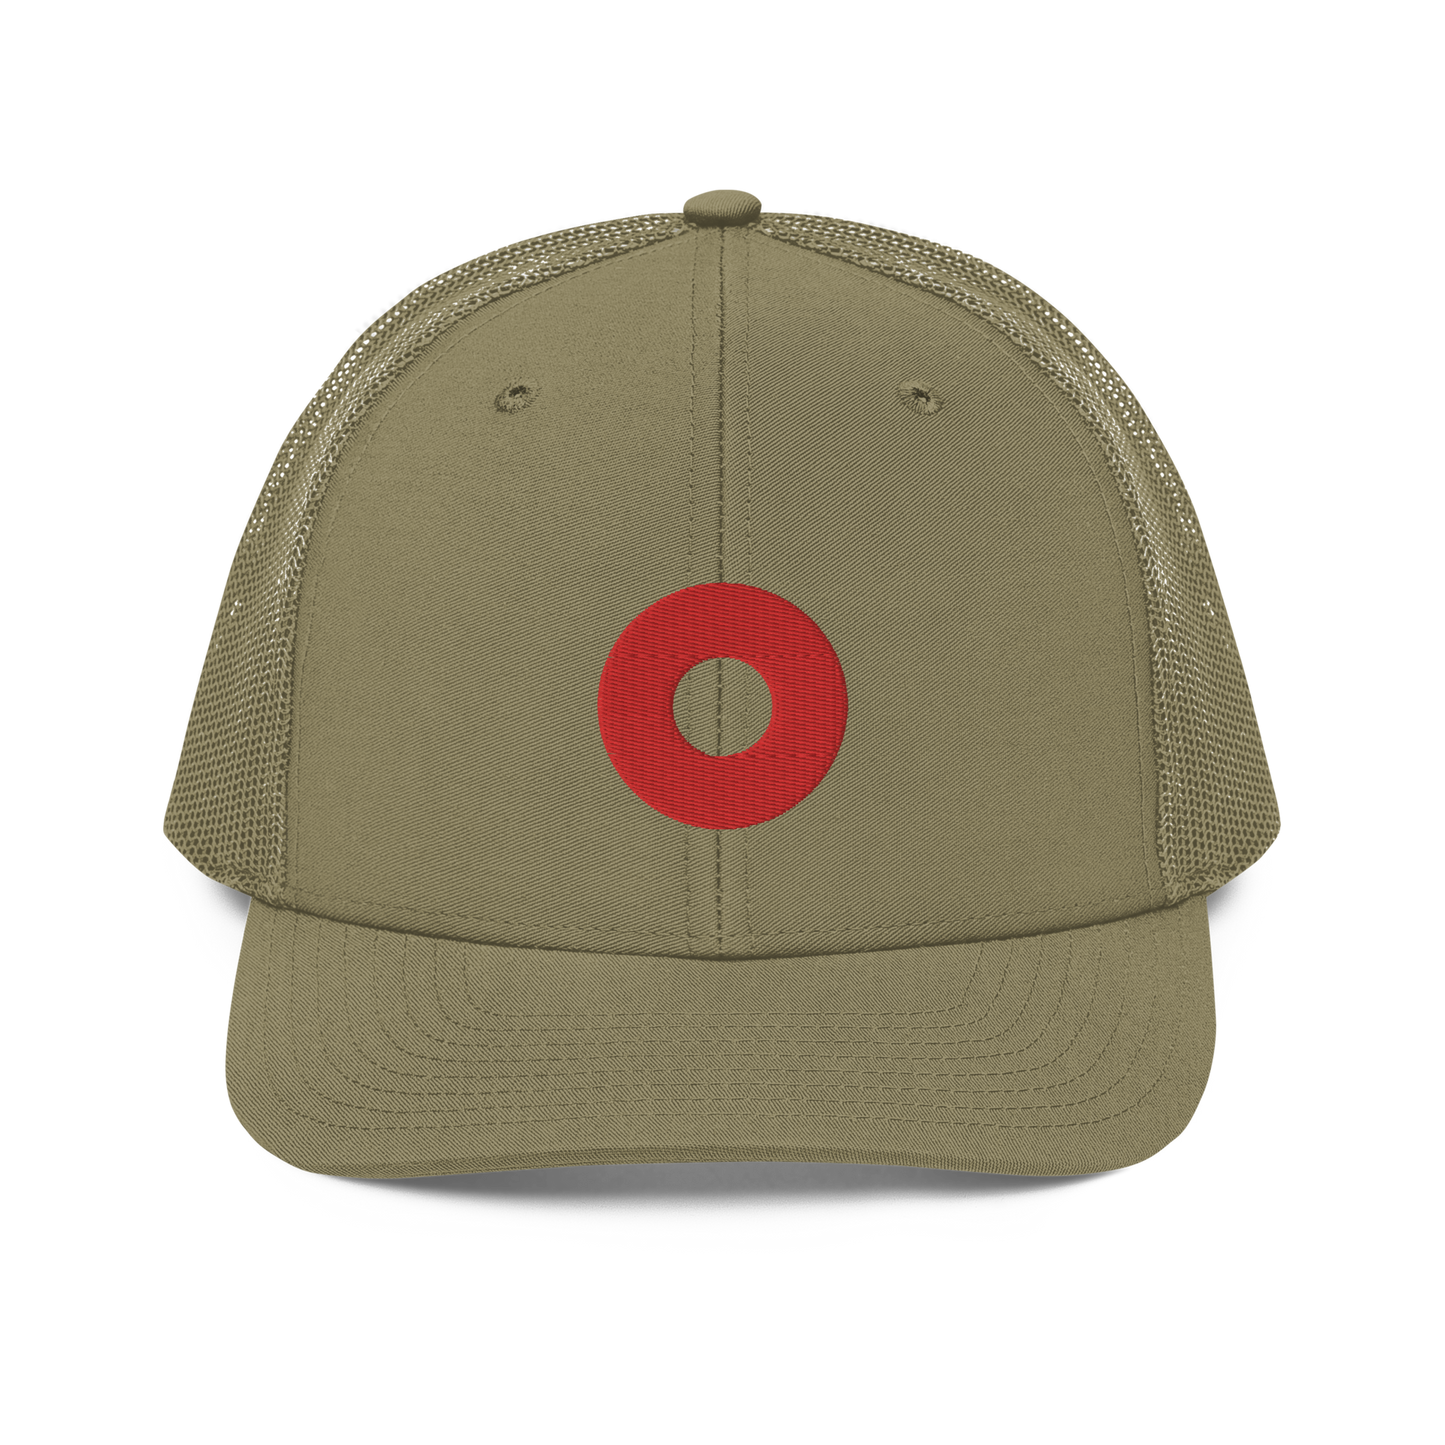 Red Donut Center Embroidery 112 Snapback Cap